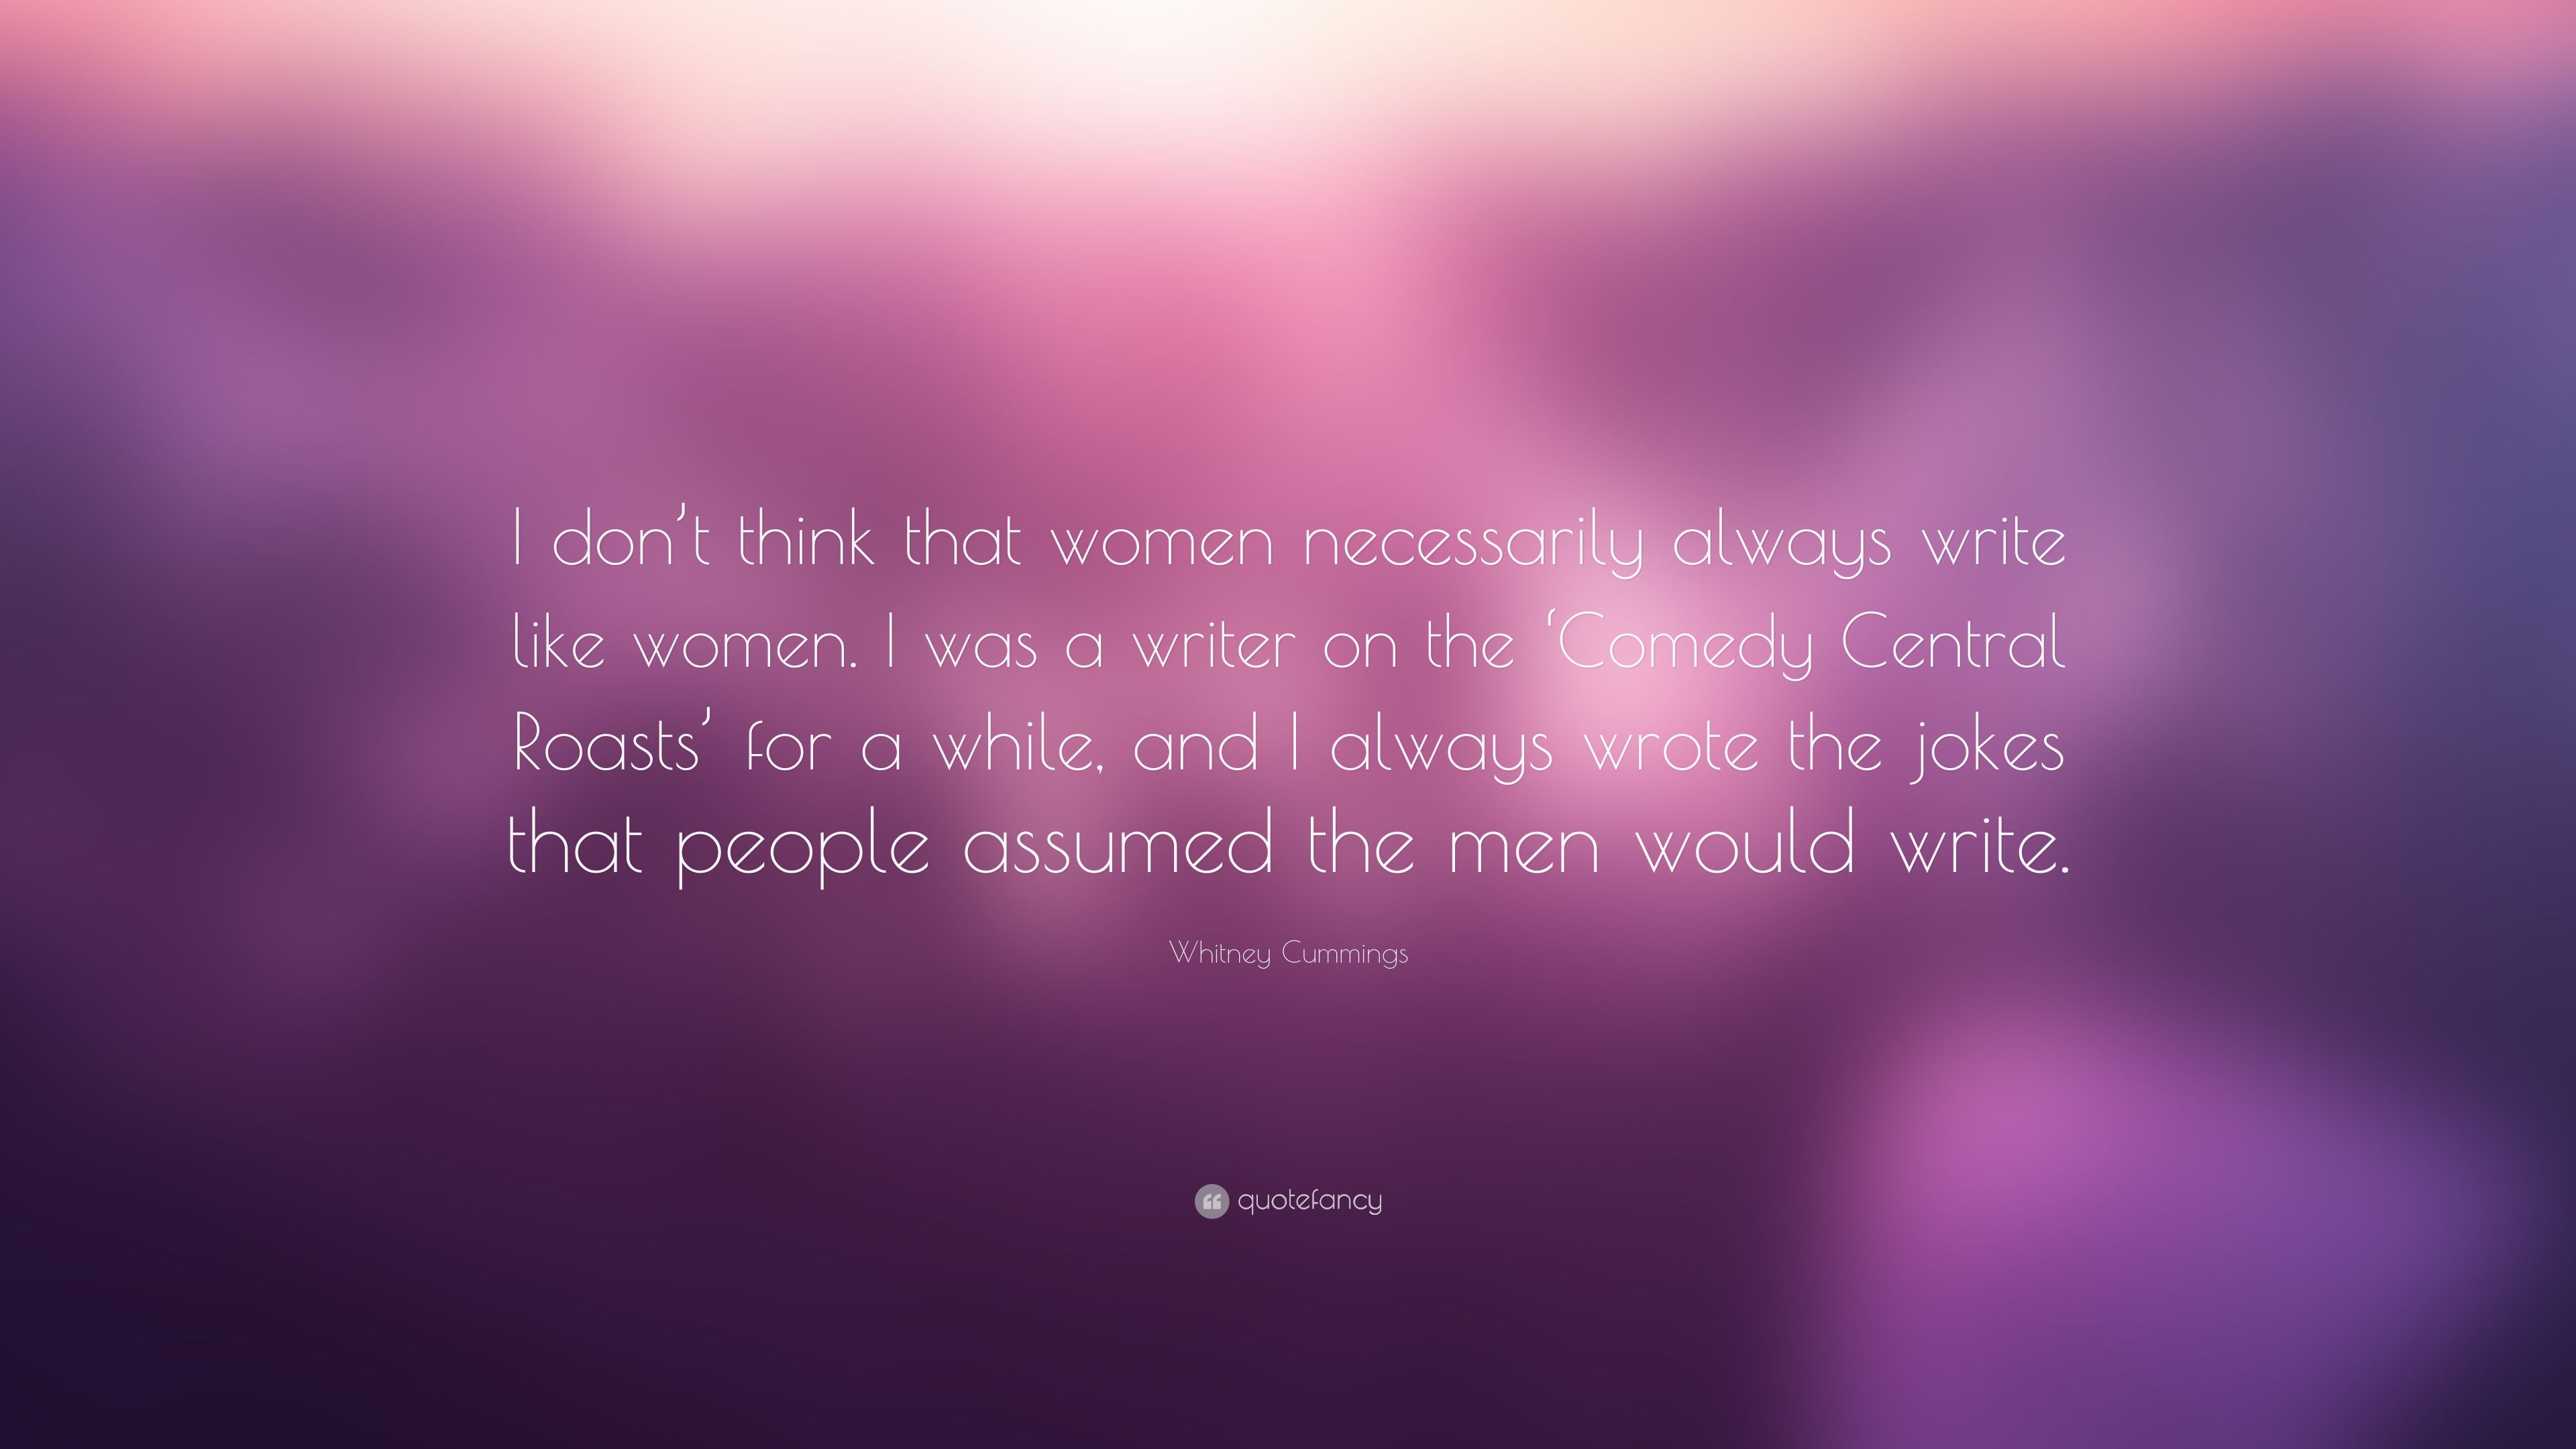 Whitney Cummings Quote: “I don't think that women necessarily